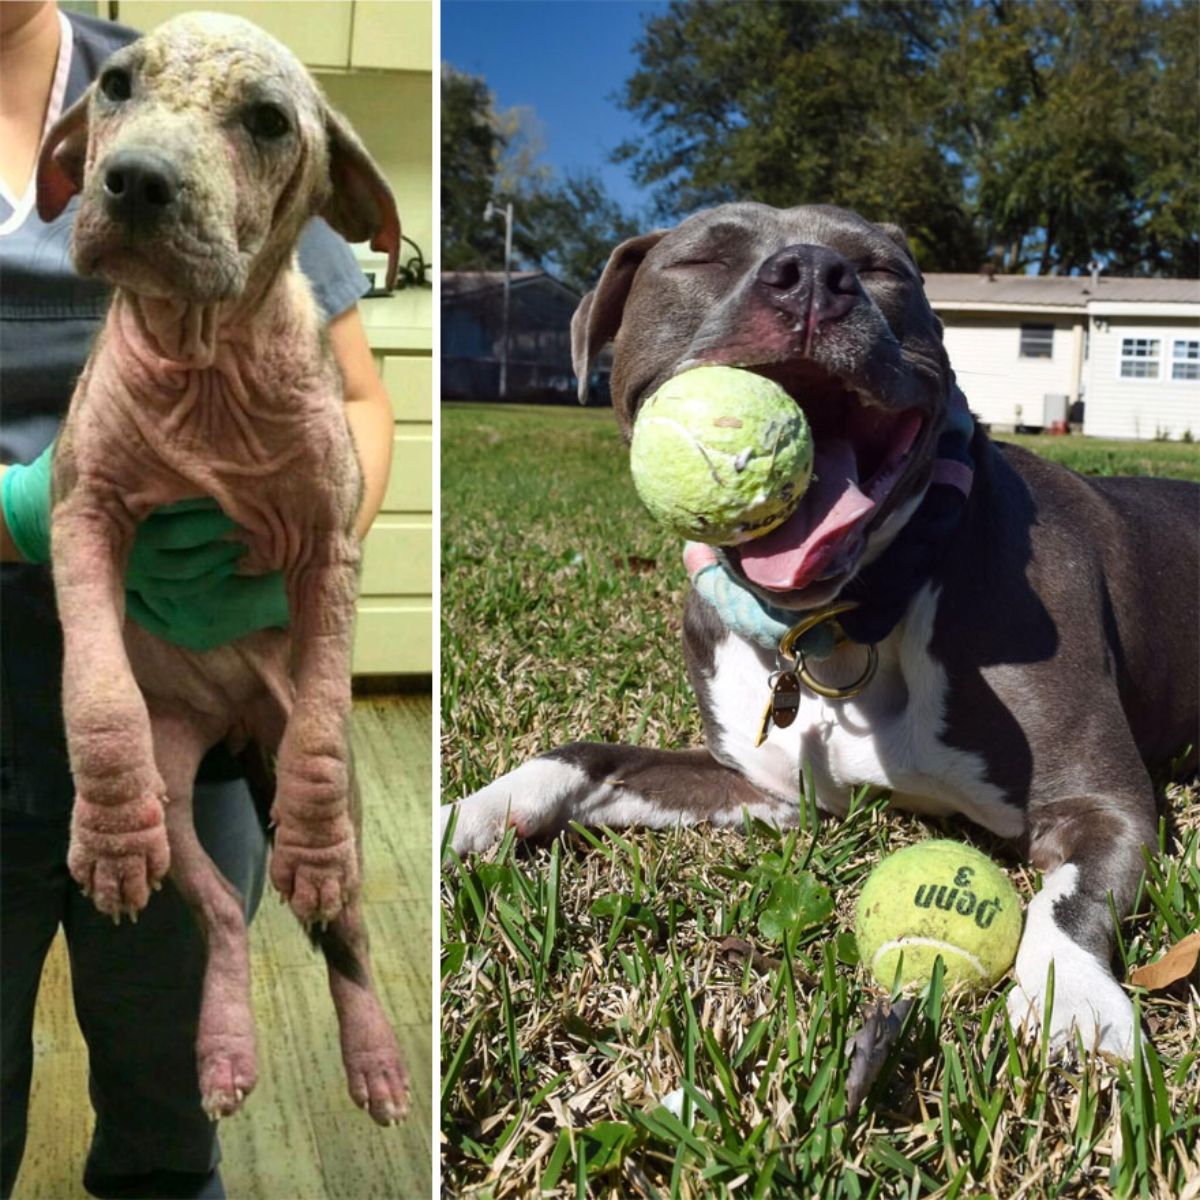 before photo of furless dog being held up and after photo of black and white dog holding a tennis ball